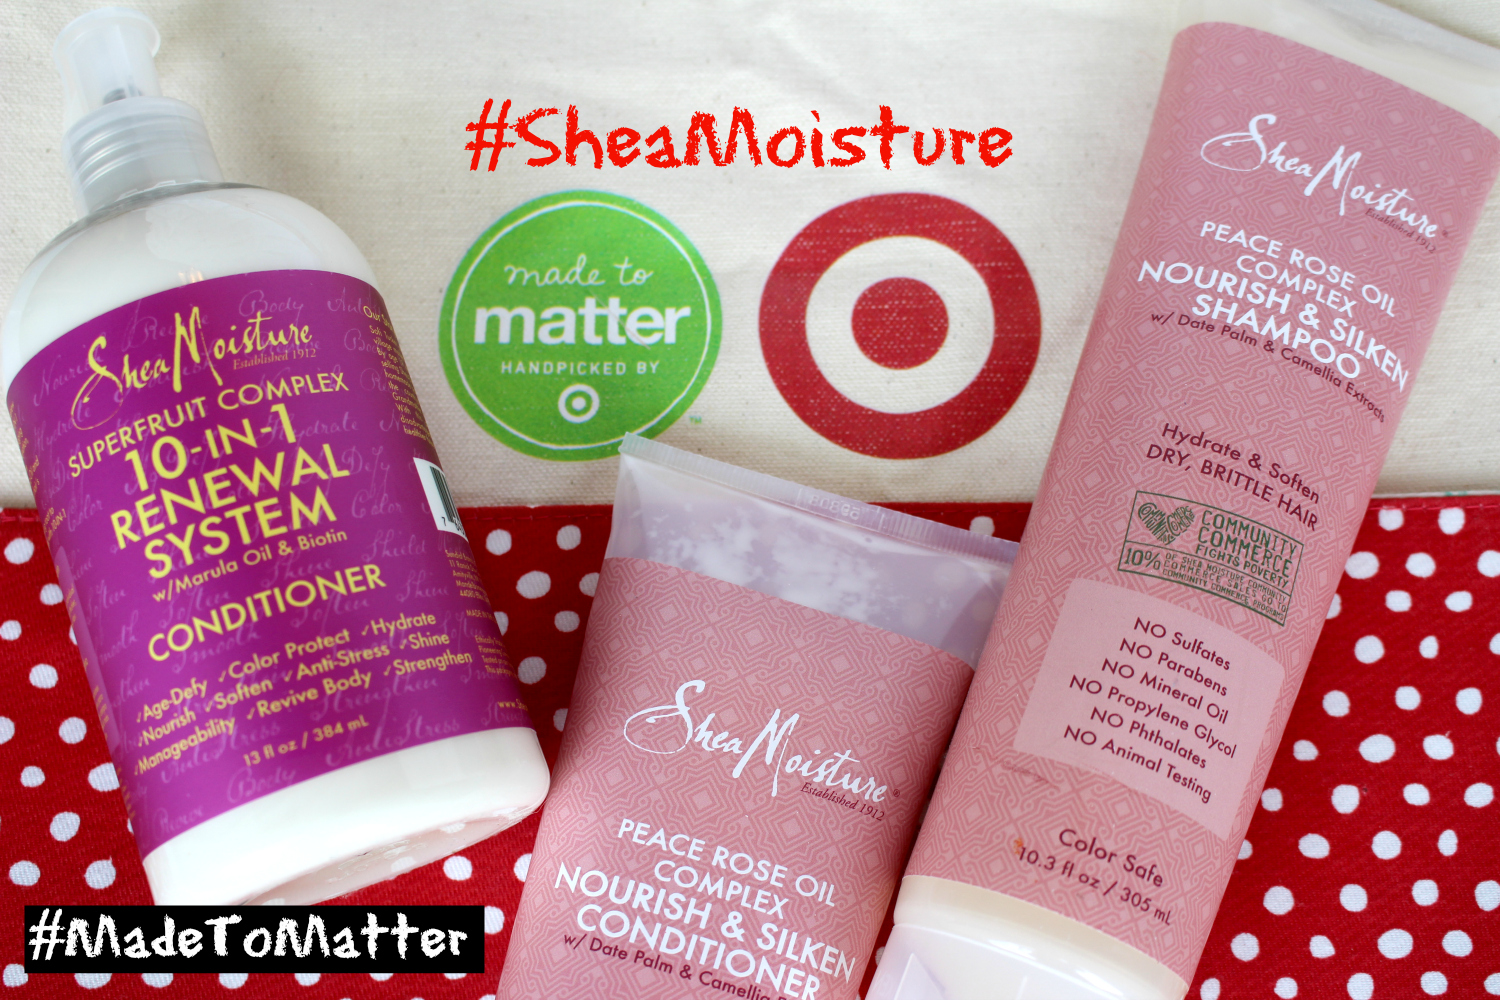 Shea Moisture products #MadetoMatter from Target